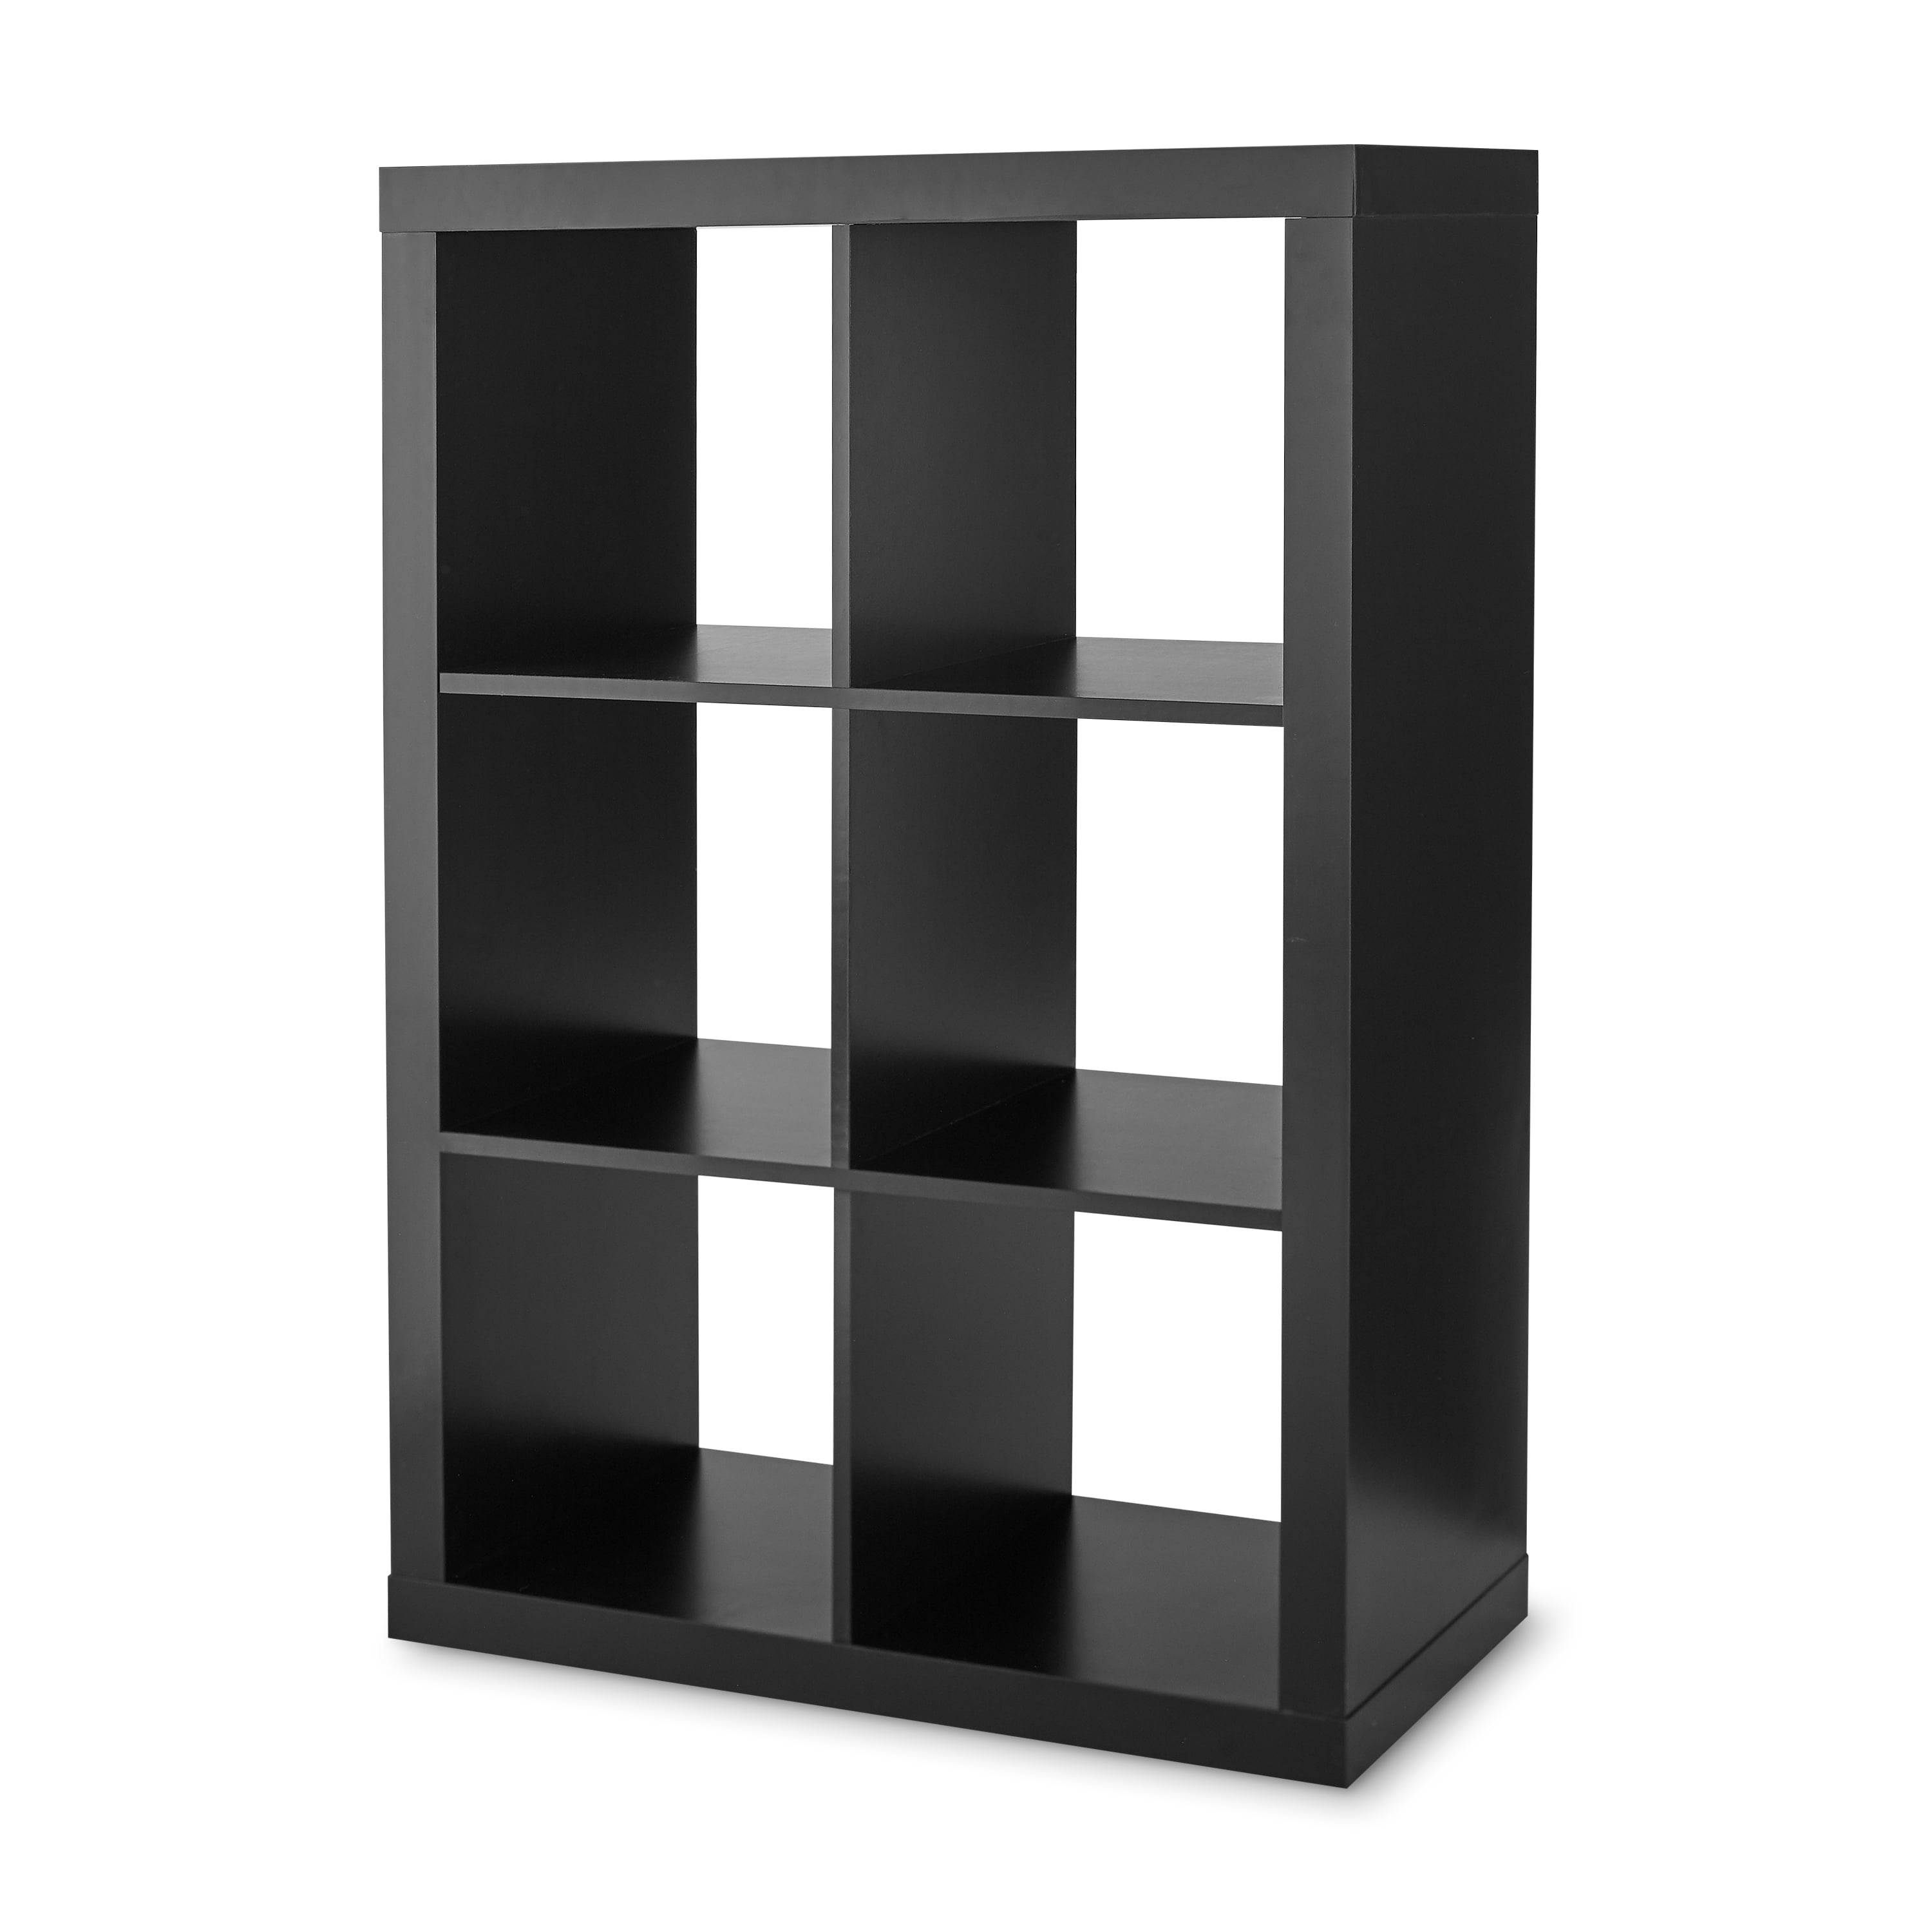 Multiple Colors 9 Cube Storage Organizer Stylish Bookcase Better Homes Gardens